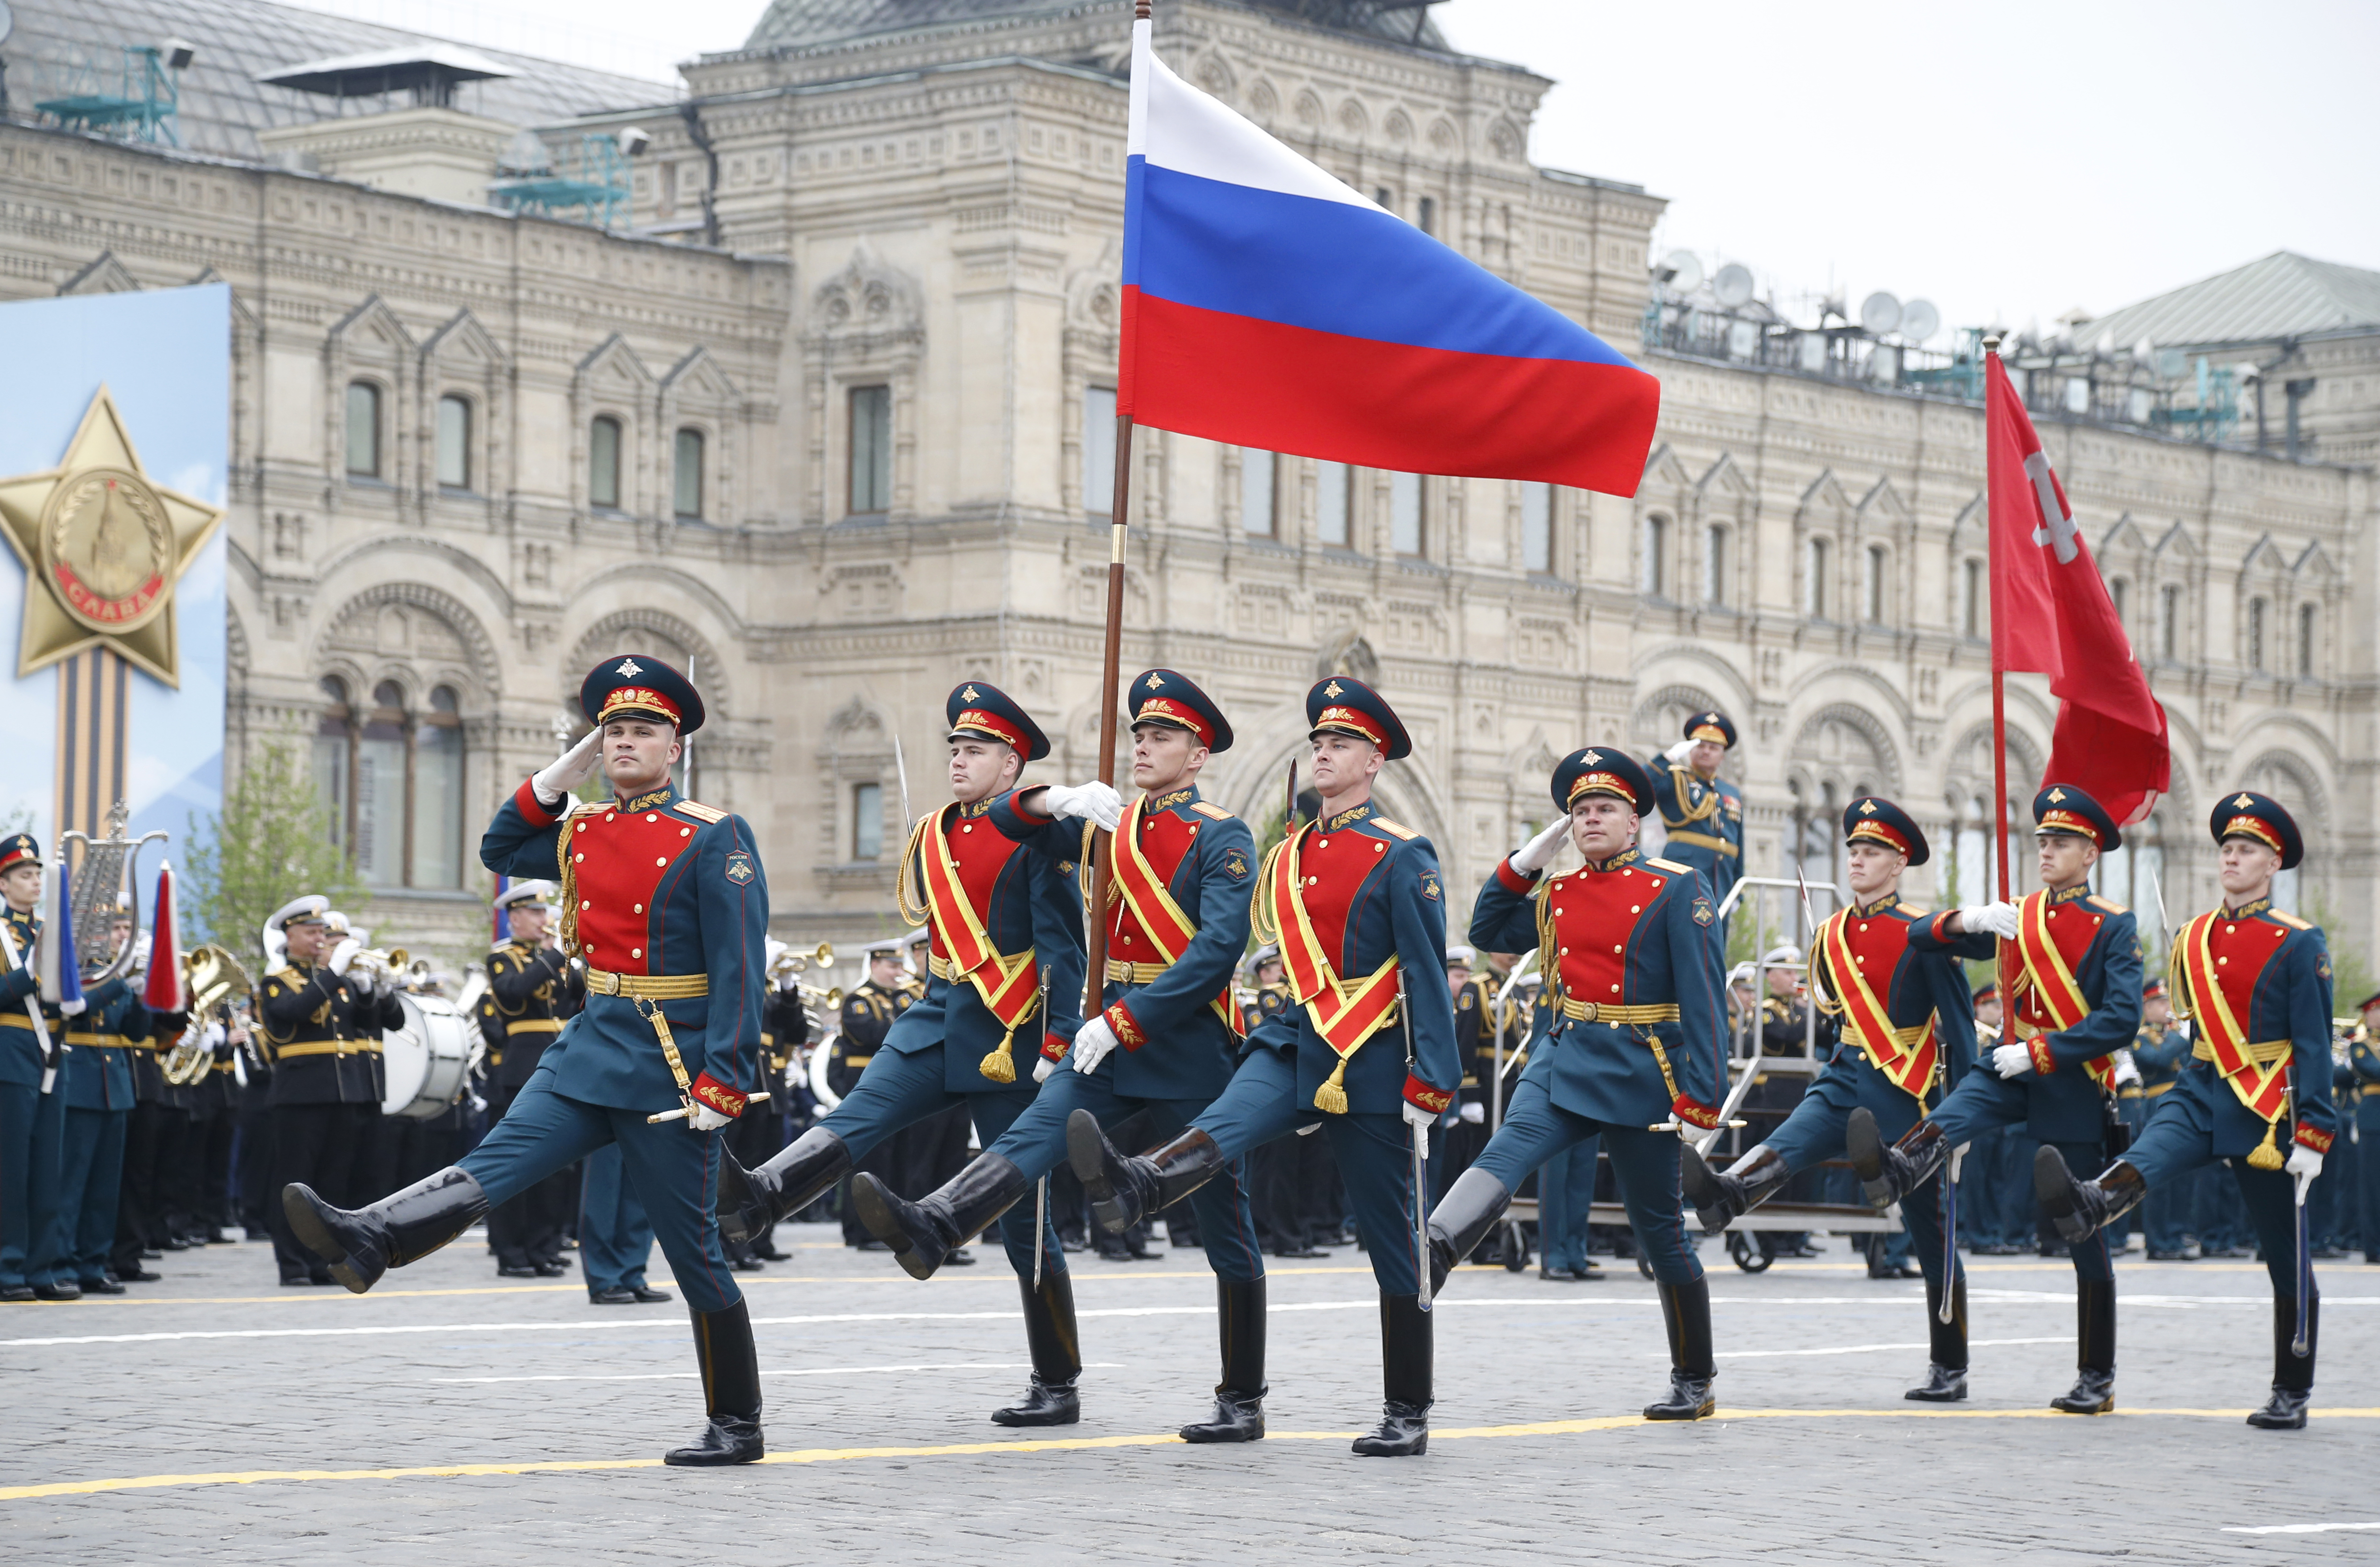 Russian honour guard carry a national flag, left, and a replica of the Victory banner during the military parade to celebrate 74 years since the victory in WWII in Red Square in Moscow, Russia, Thursday, May 9, 2019. (AP Photo/Alexander Zemlianichenko)